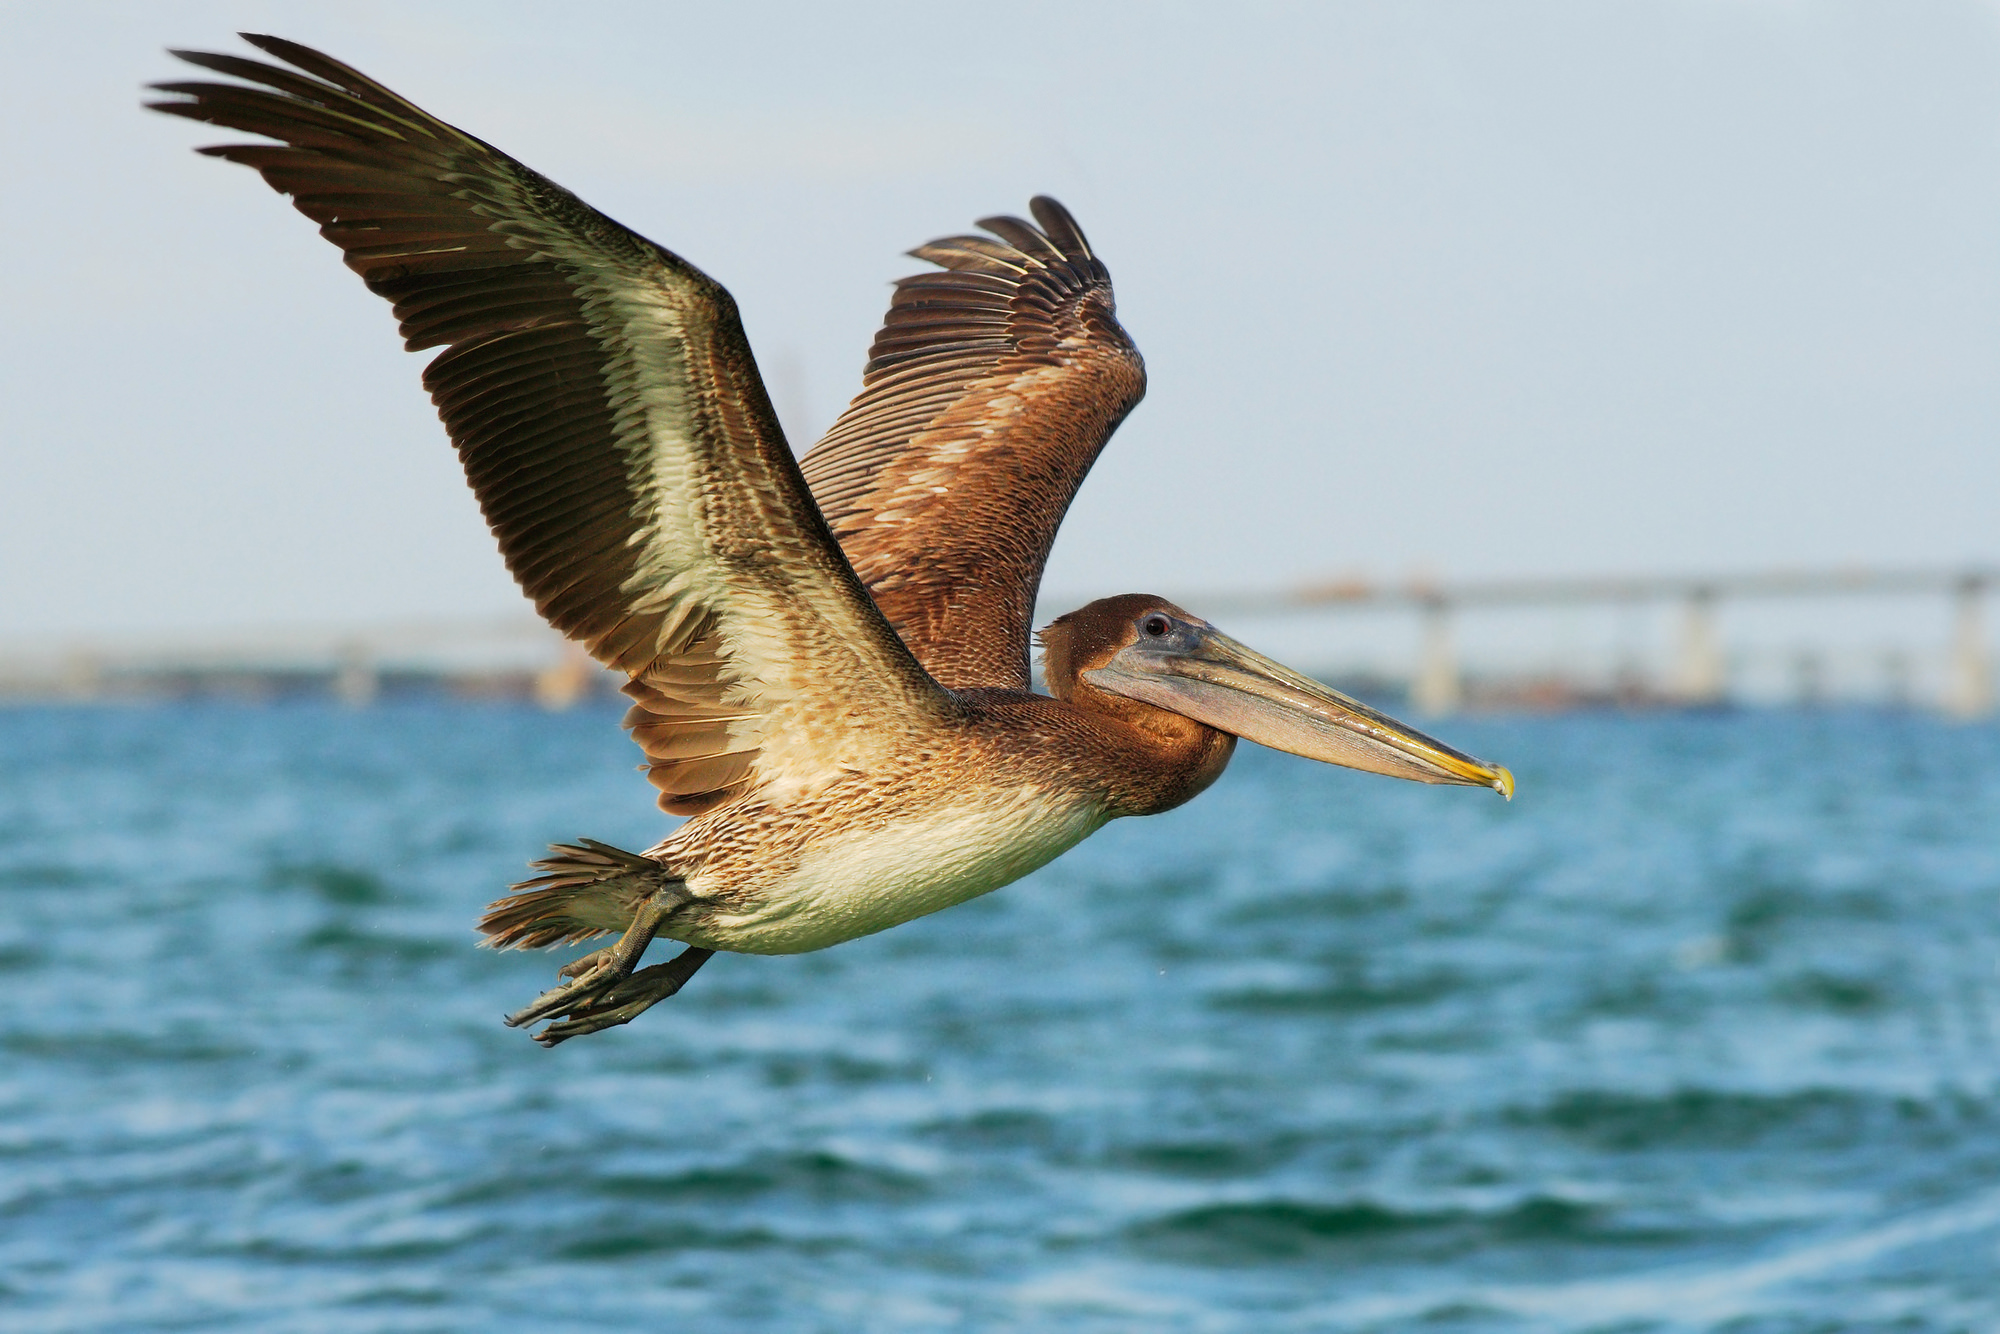 Pensacola Birdwatching Guide: Experience this Prime Birding Locale